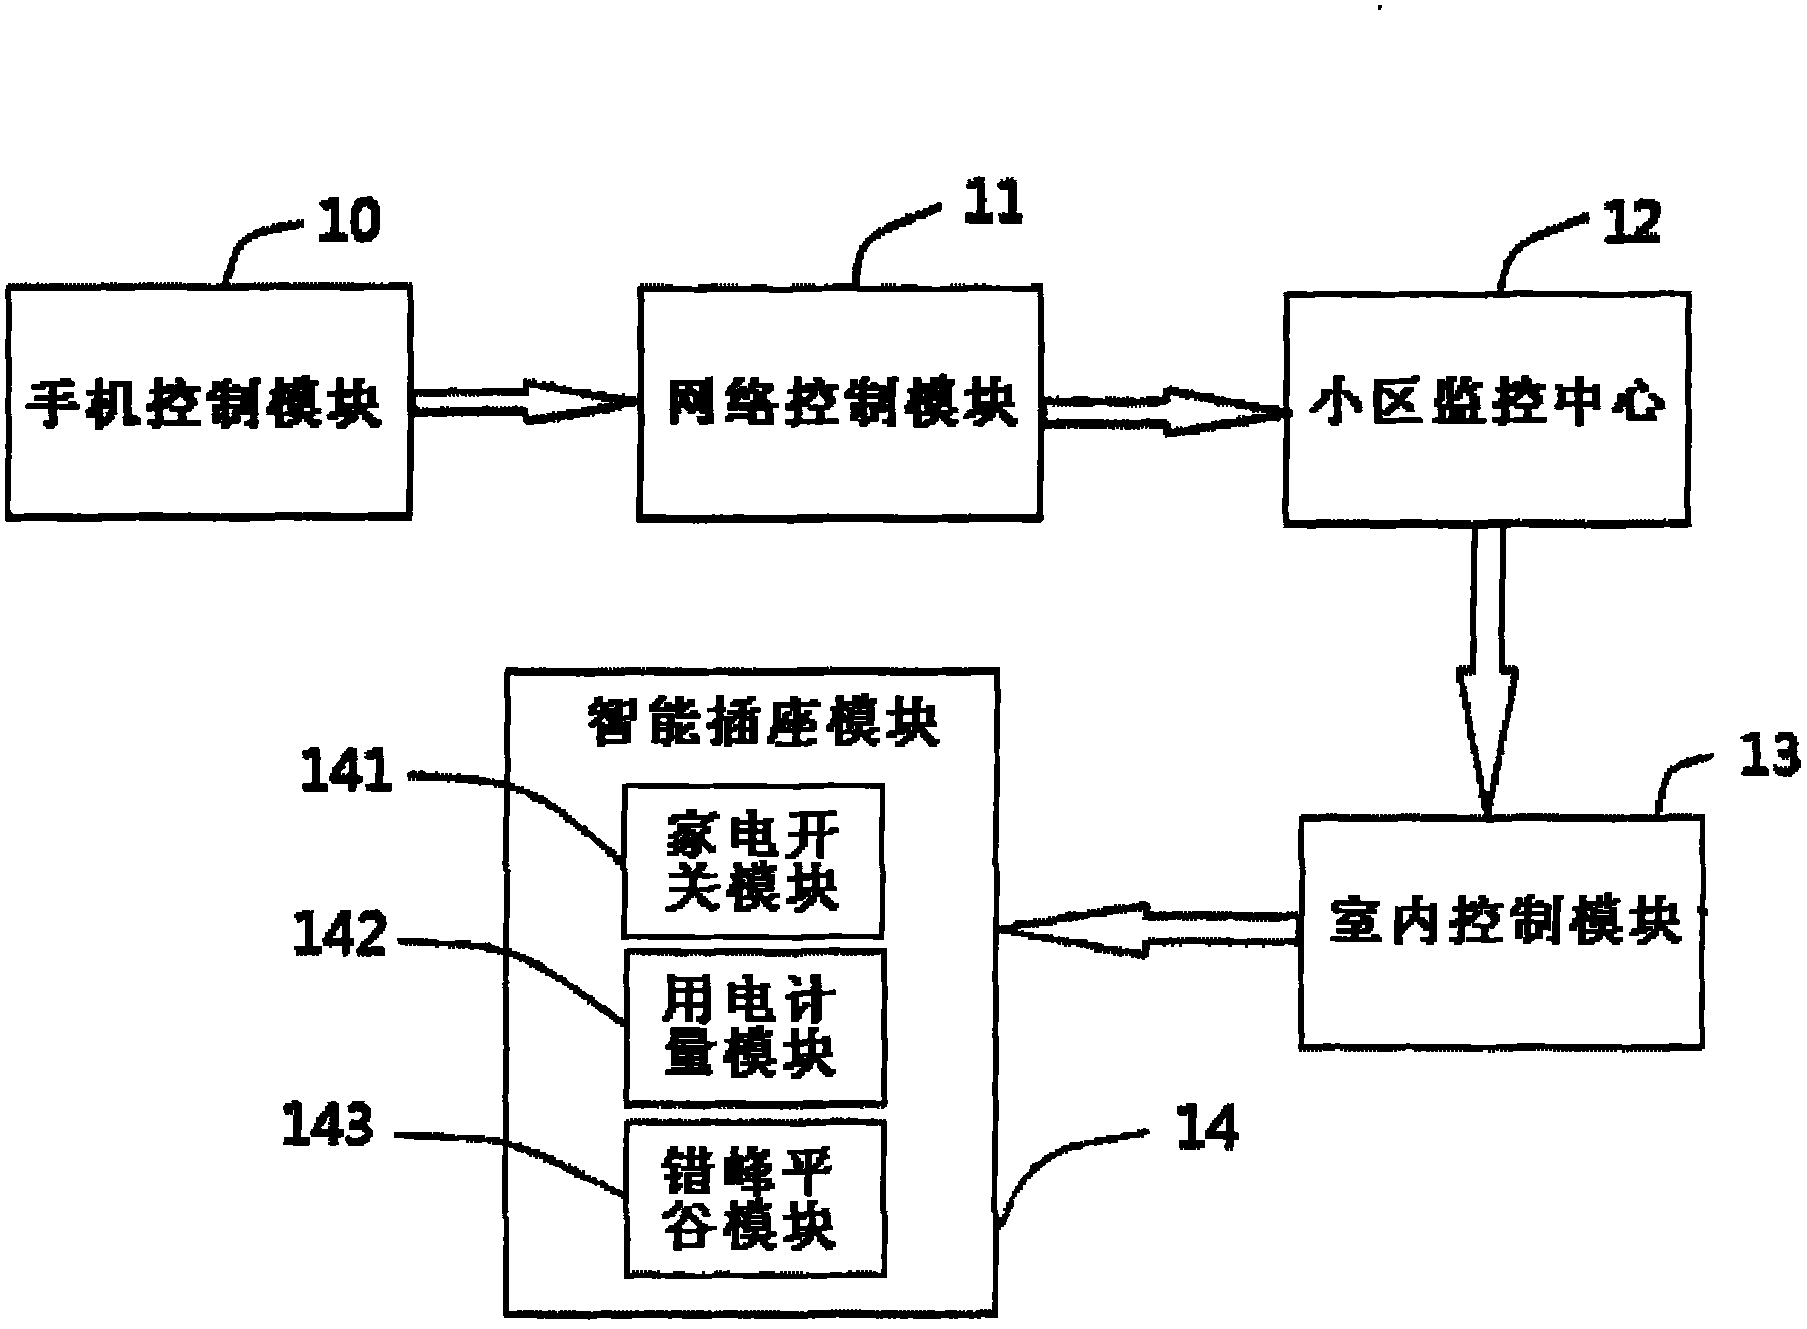 Remote control system and control method for intelligent home